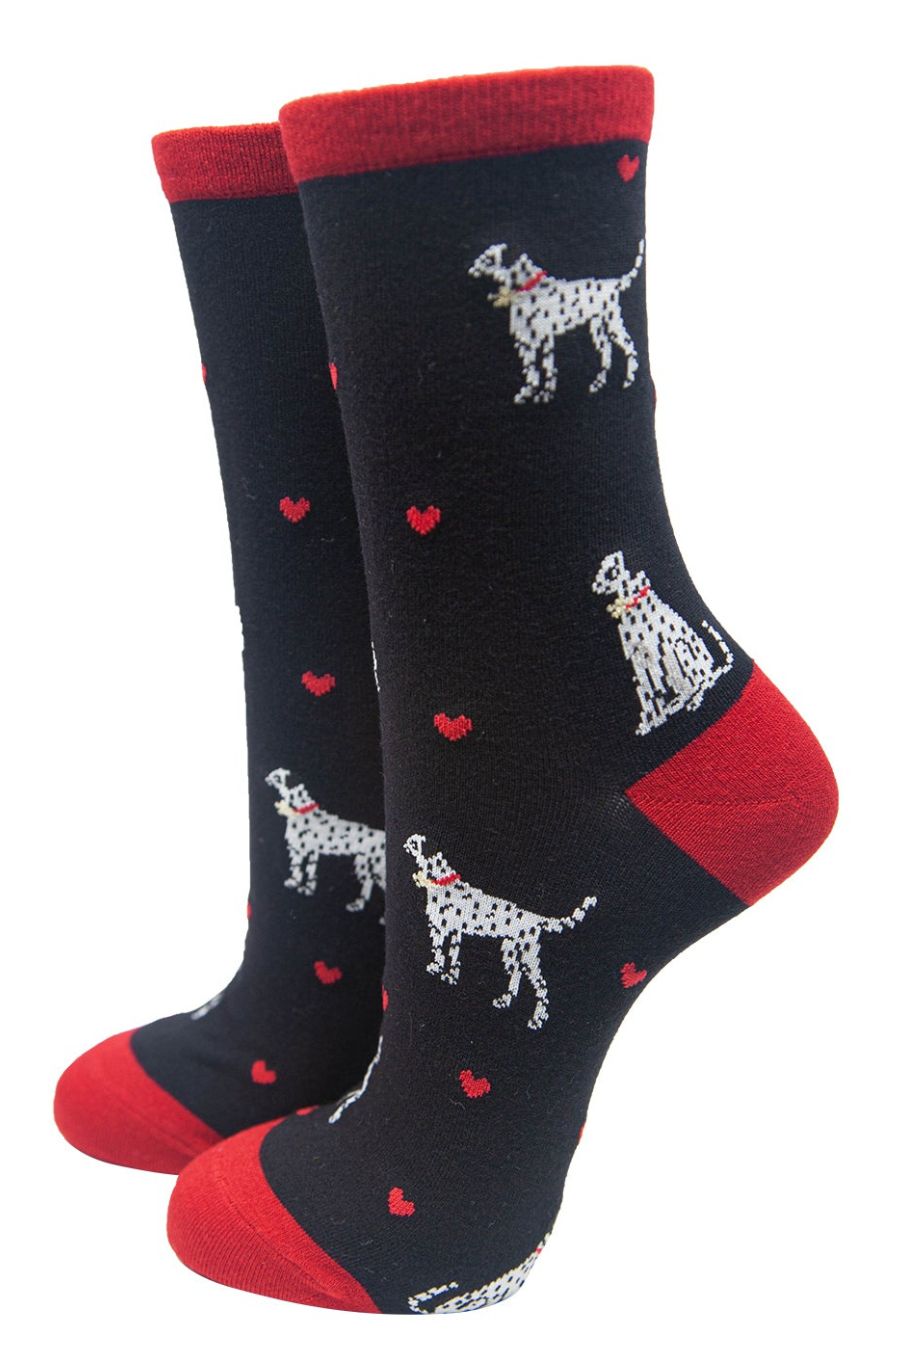 black ankle socks with dalmatian dogs and red love hearts